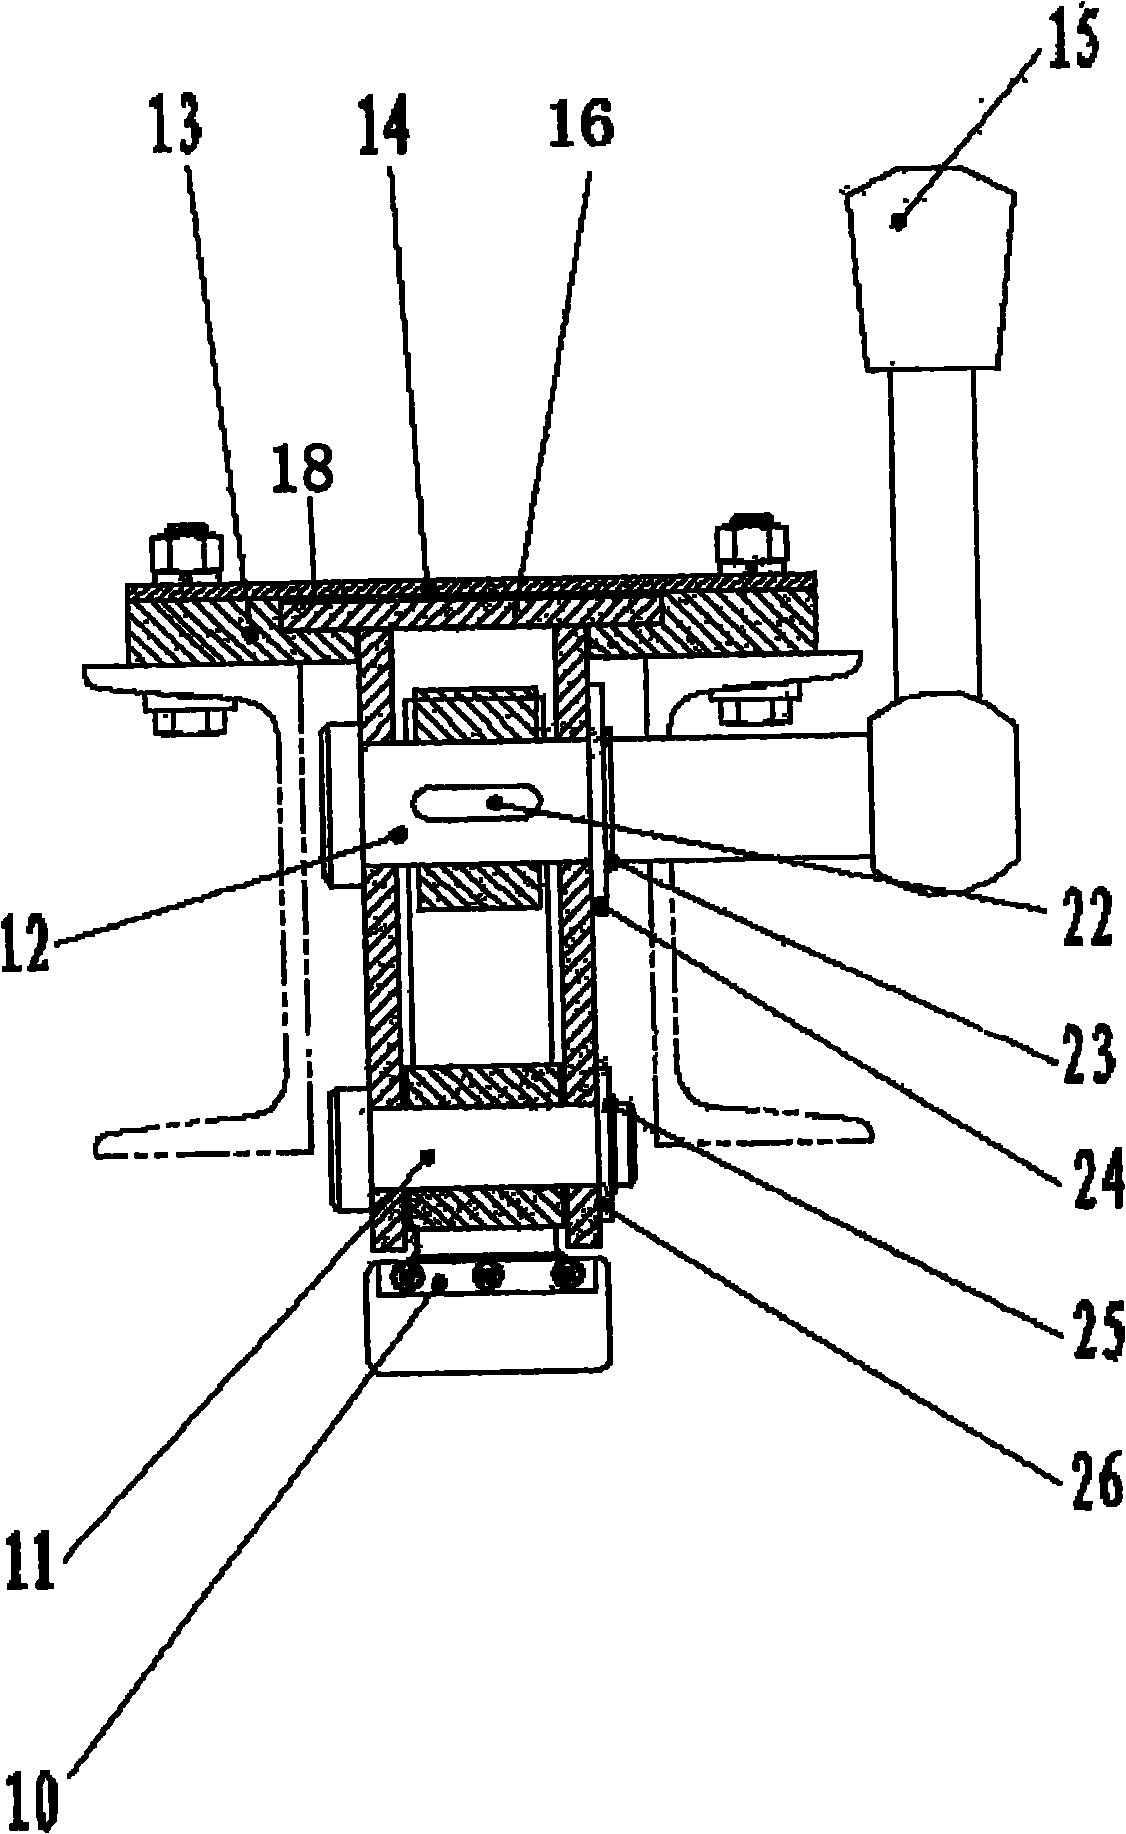 Rail clamping device structure